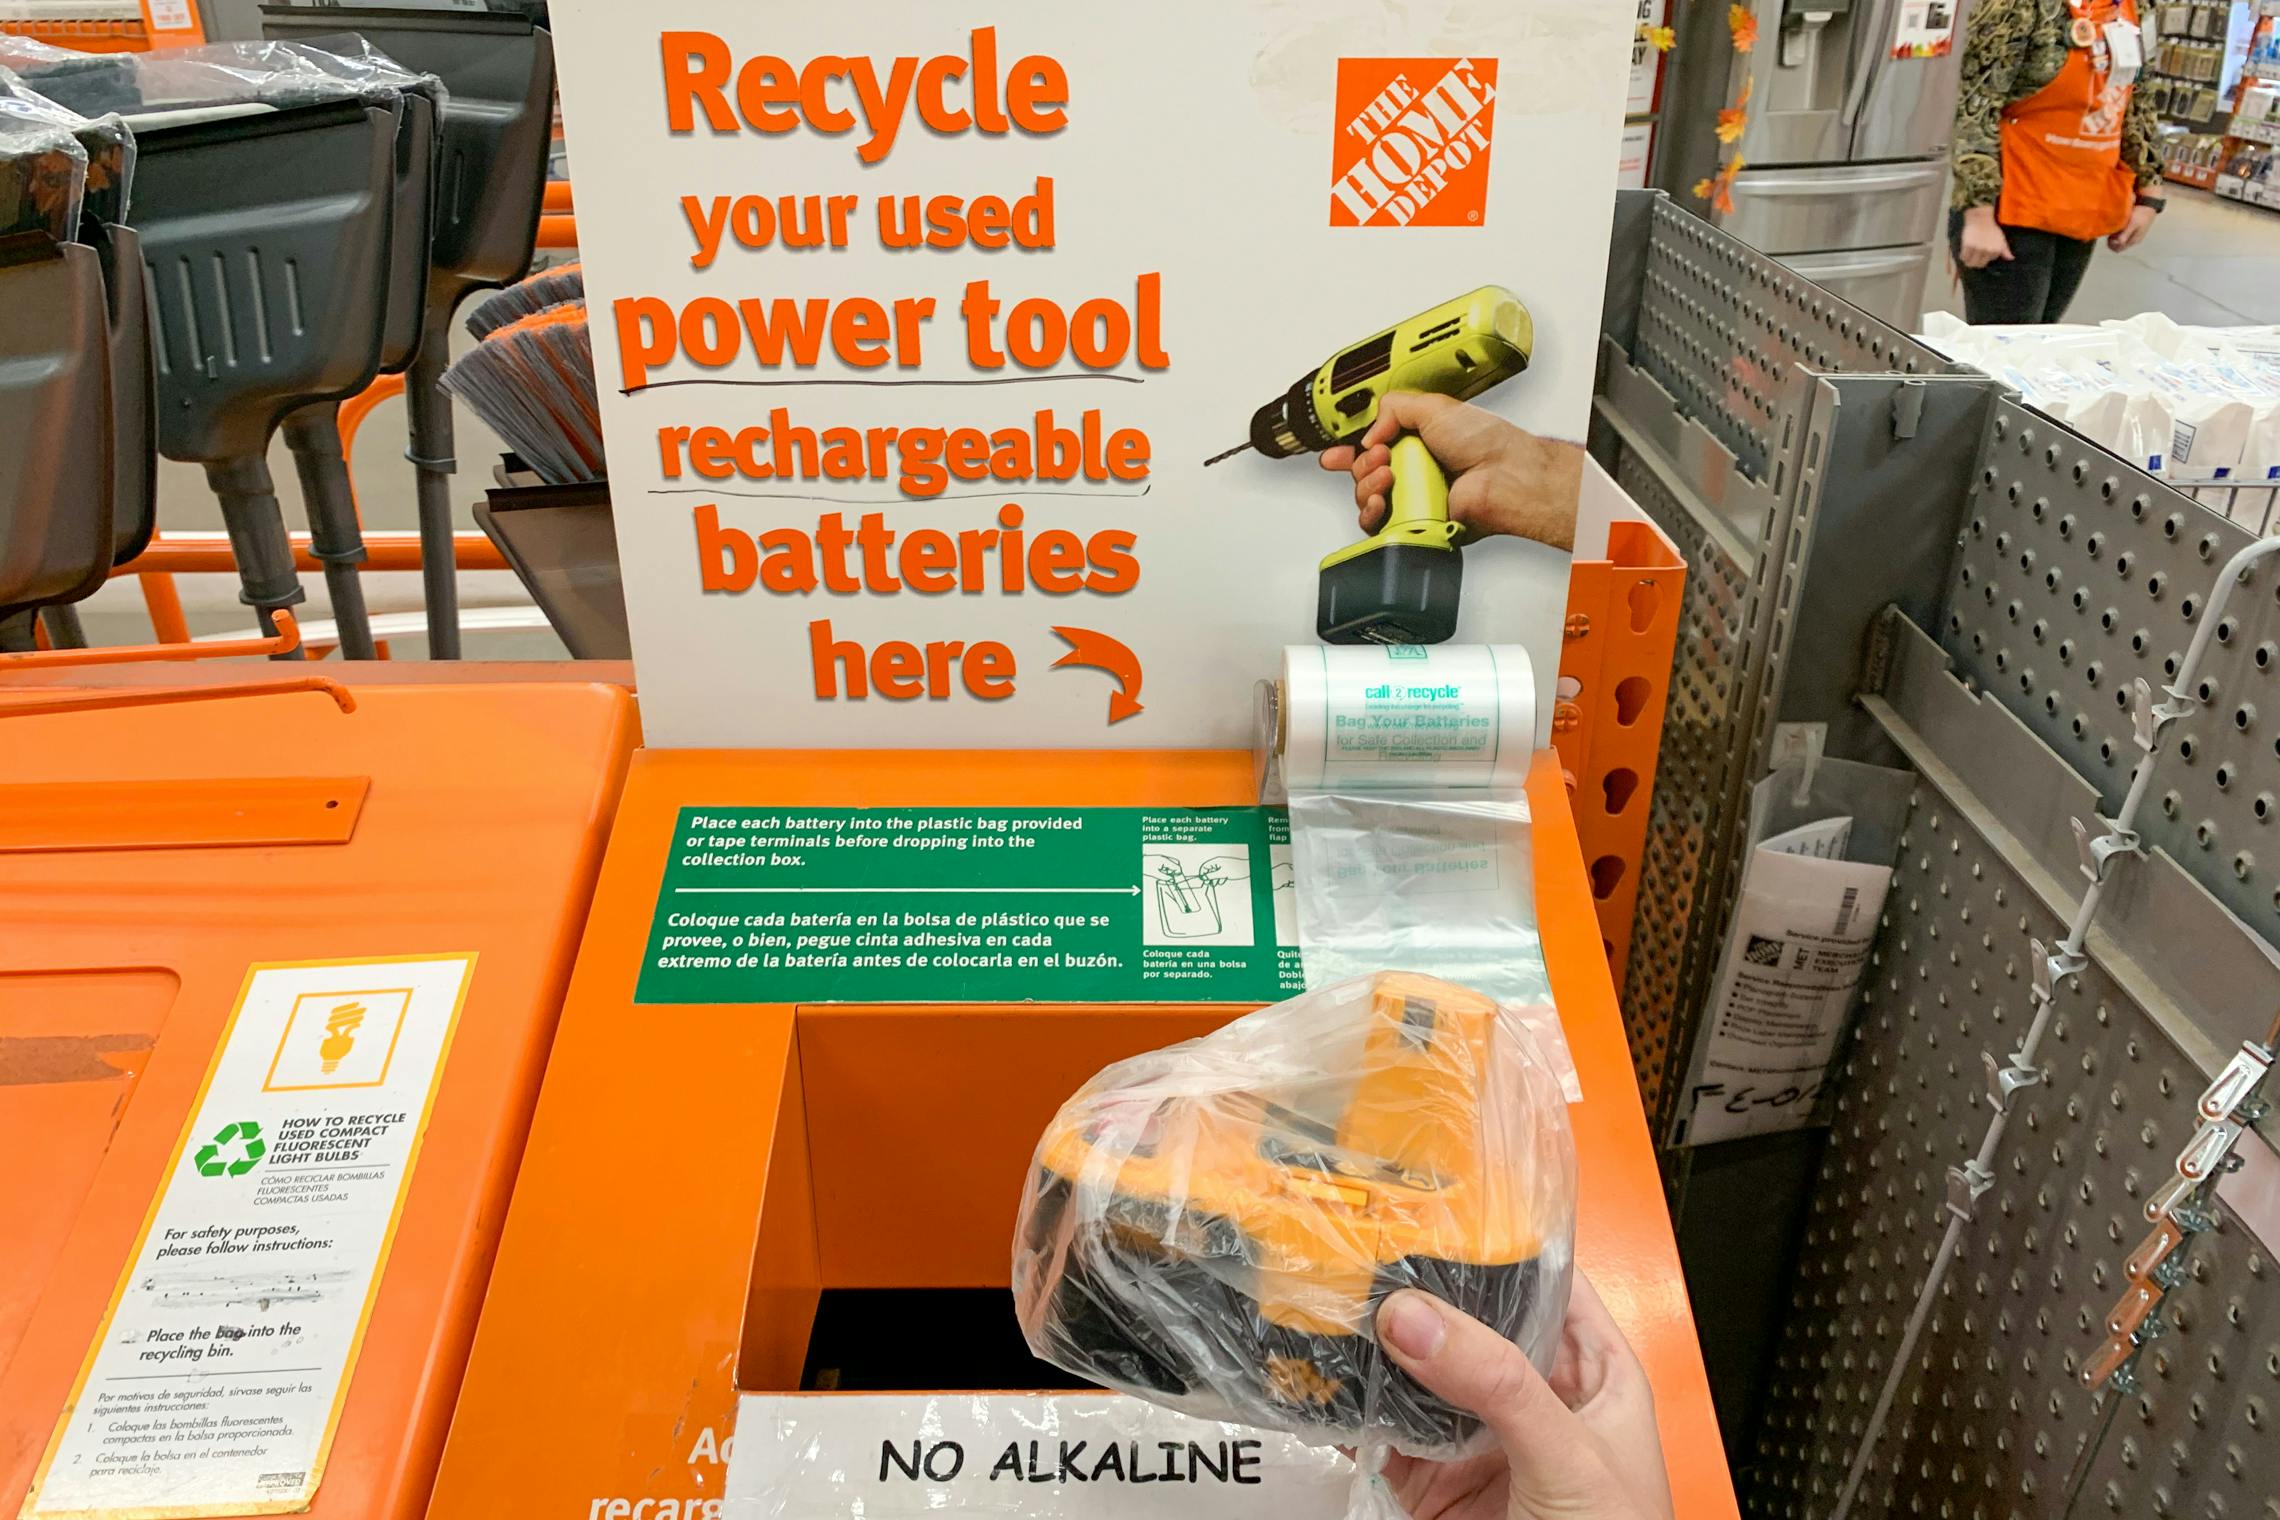 A person holding a rechargeable power tool battery in a plastic bag, in front of the recycle bin at home depot.